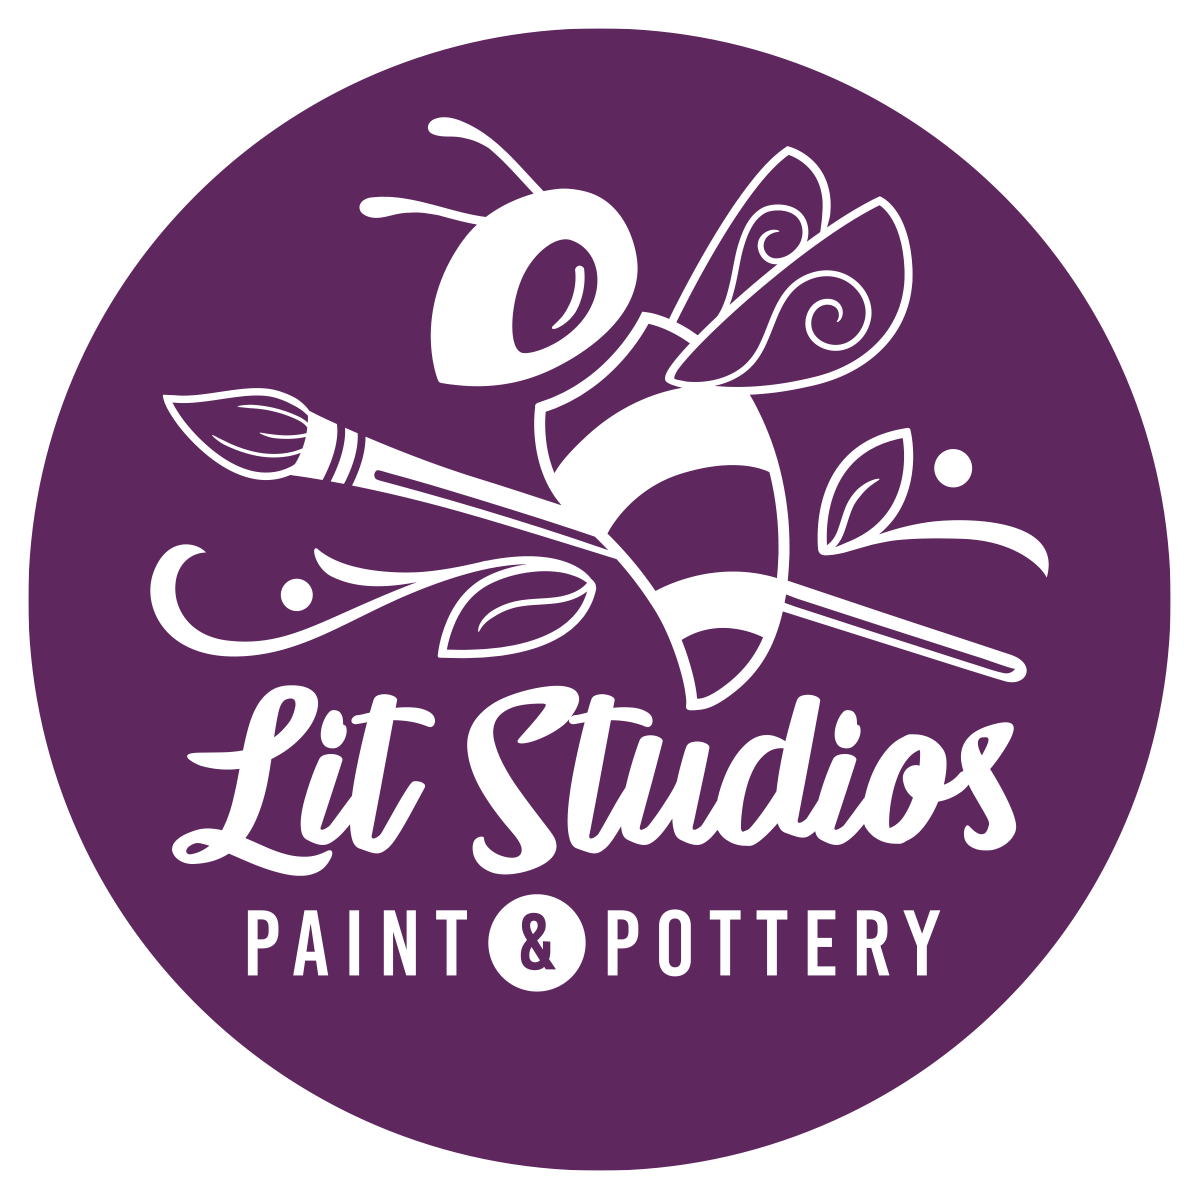 Home | Lit Studios Paint and Pottery